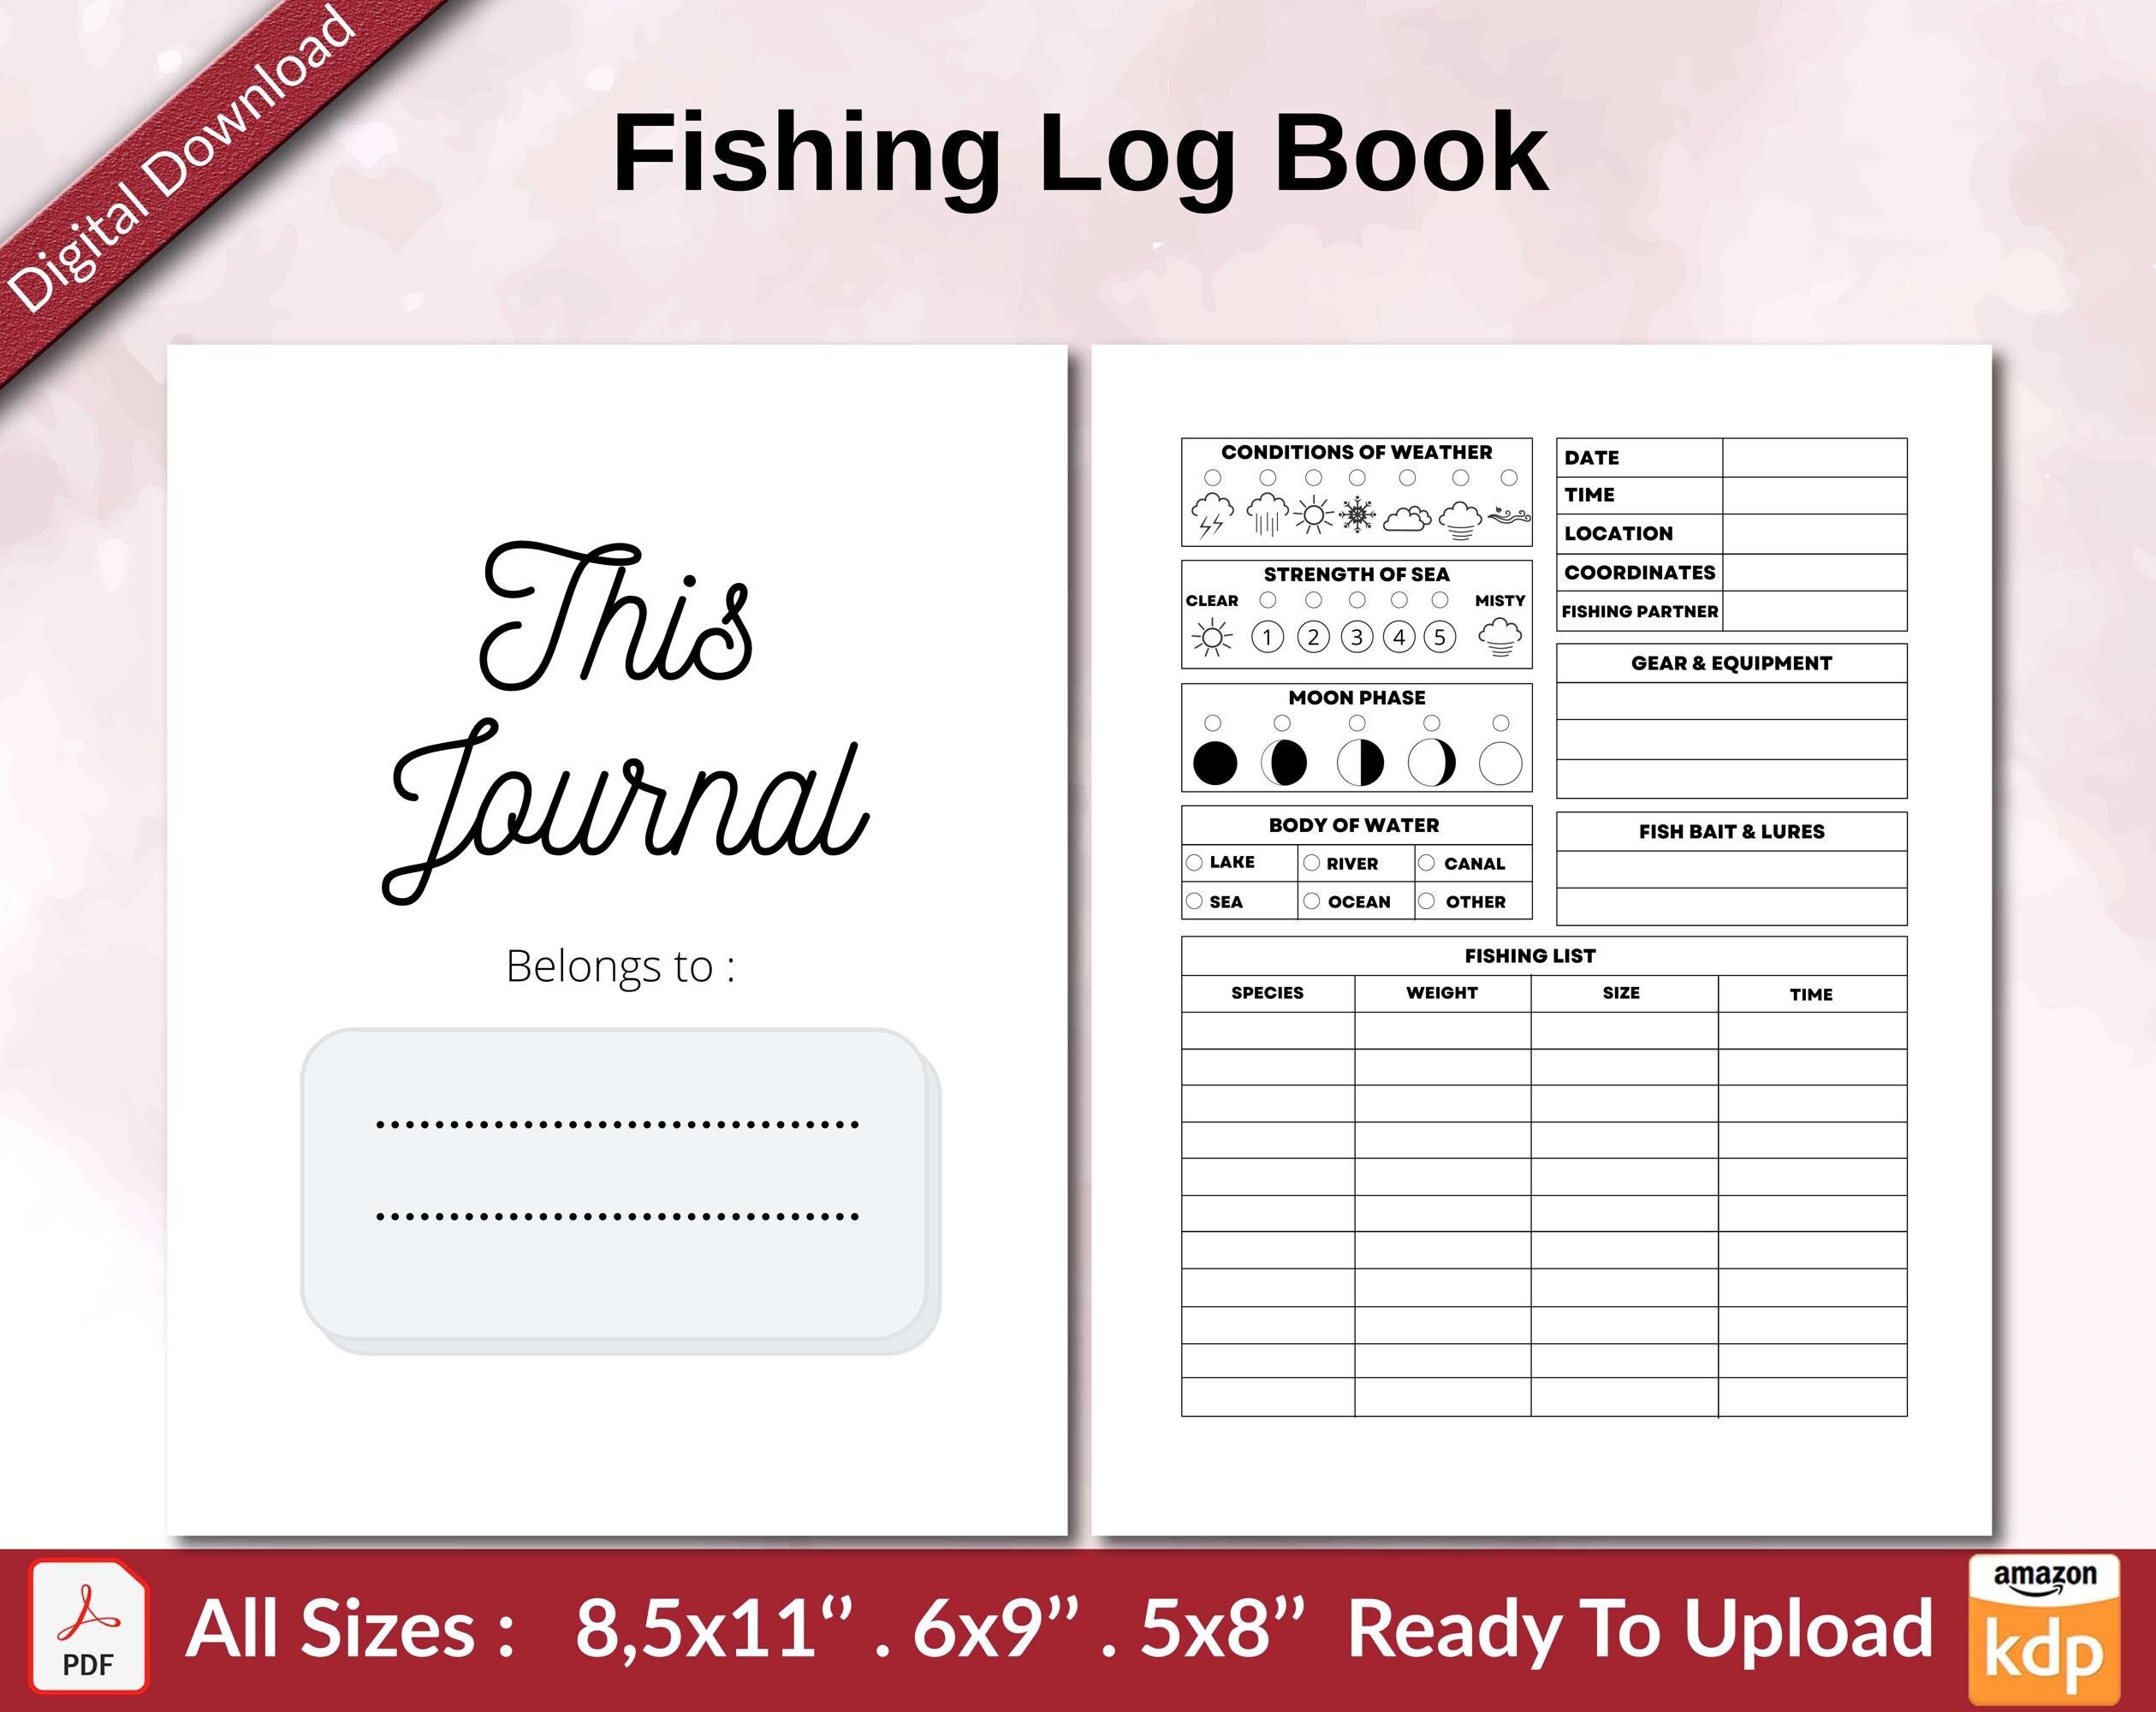 FISHING LOG BOOK: Useful and Practicable Fishing Tracker